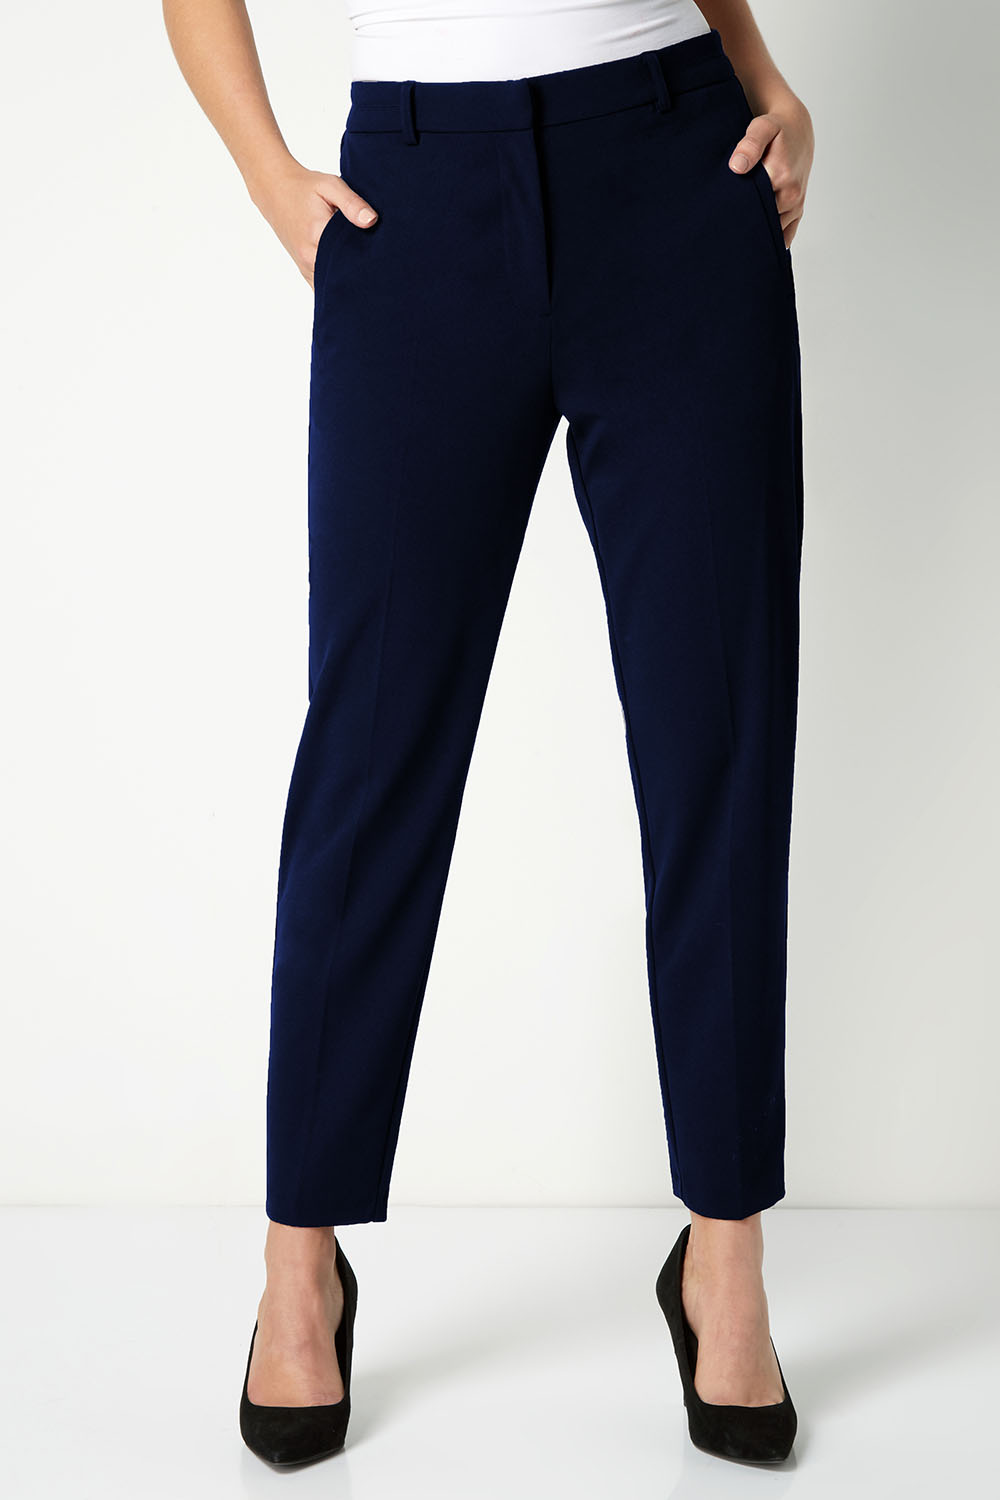 Petite Soft Jersey Tapered Trouser